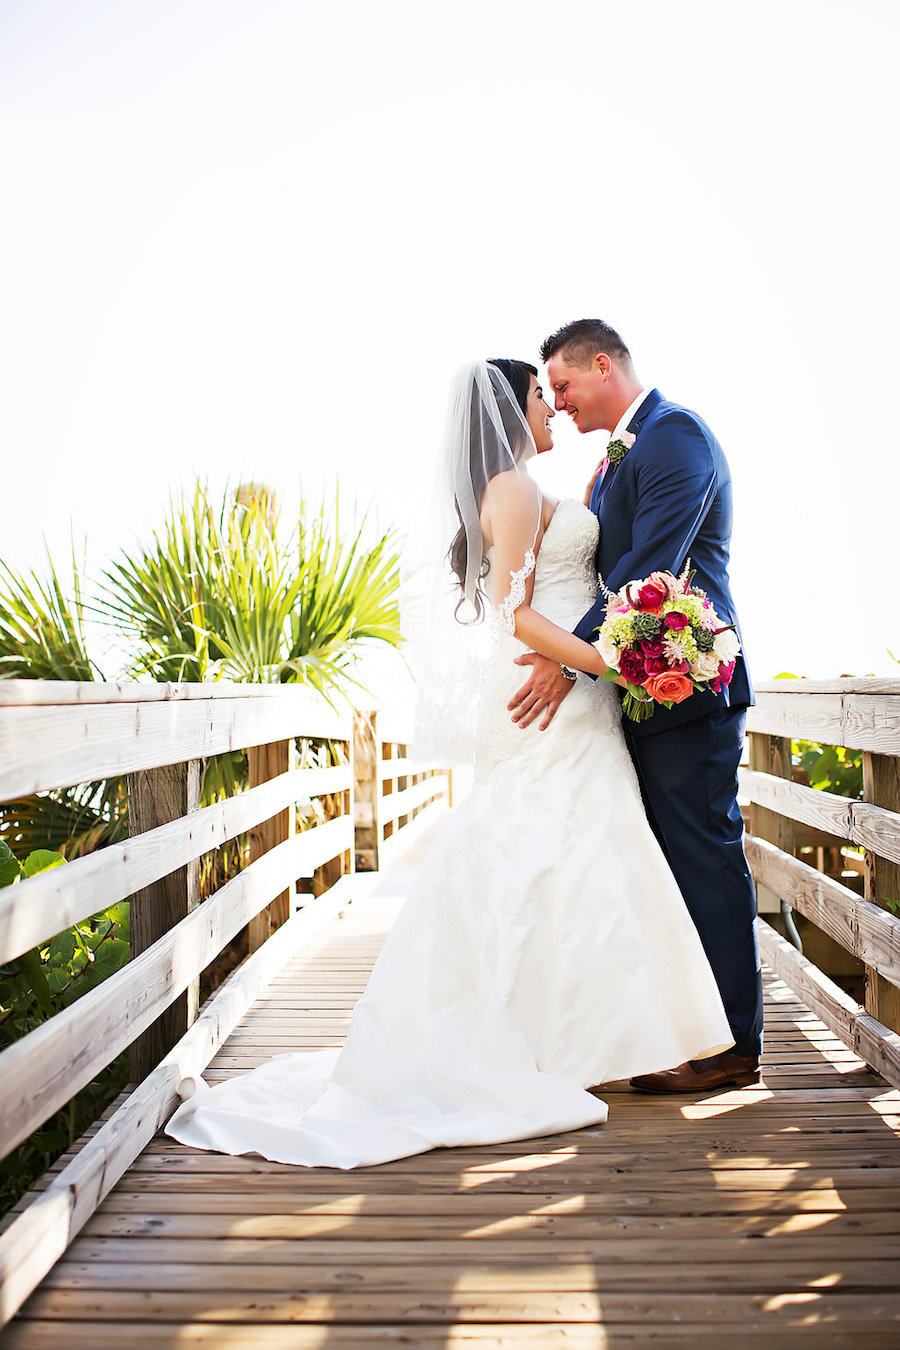 Florida Outdoor Bride and Groom Wedding Day Portrait with Pink and Green Wedding Bouquet | Sarasota Wedding Photographer Limelight Photography